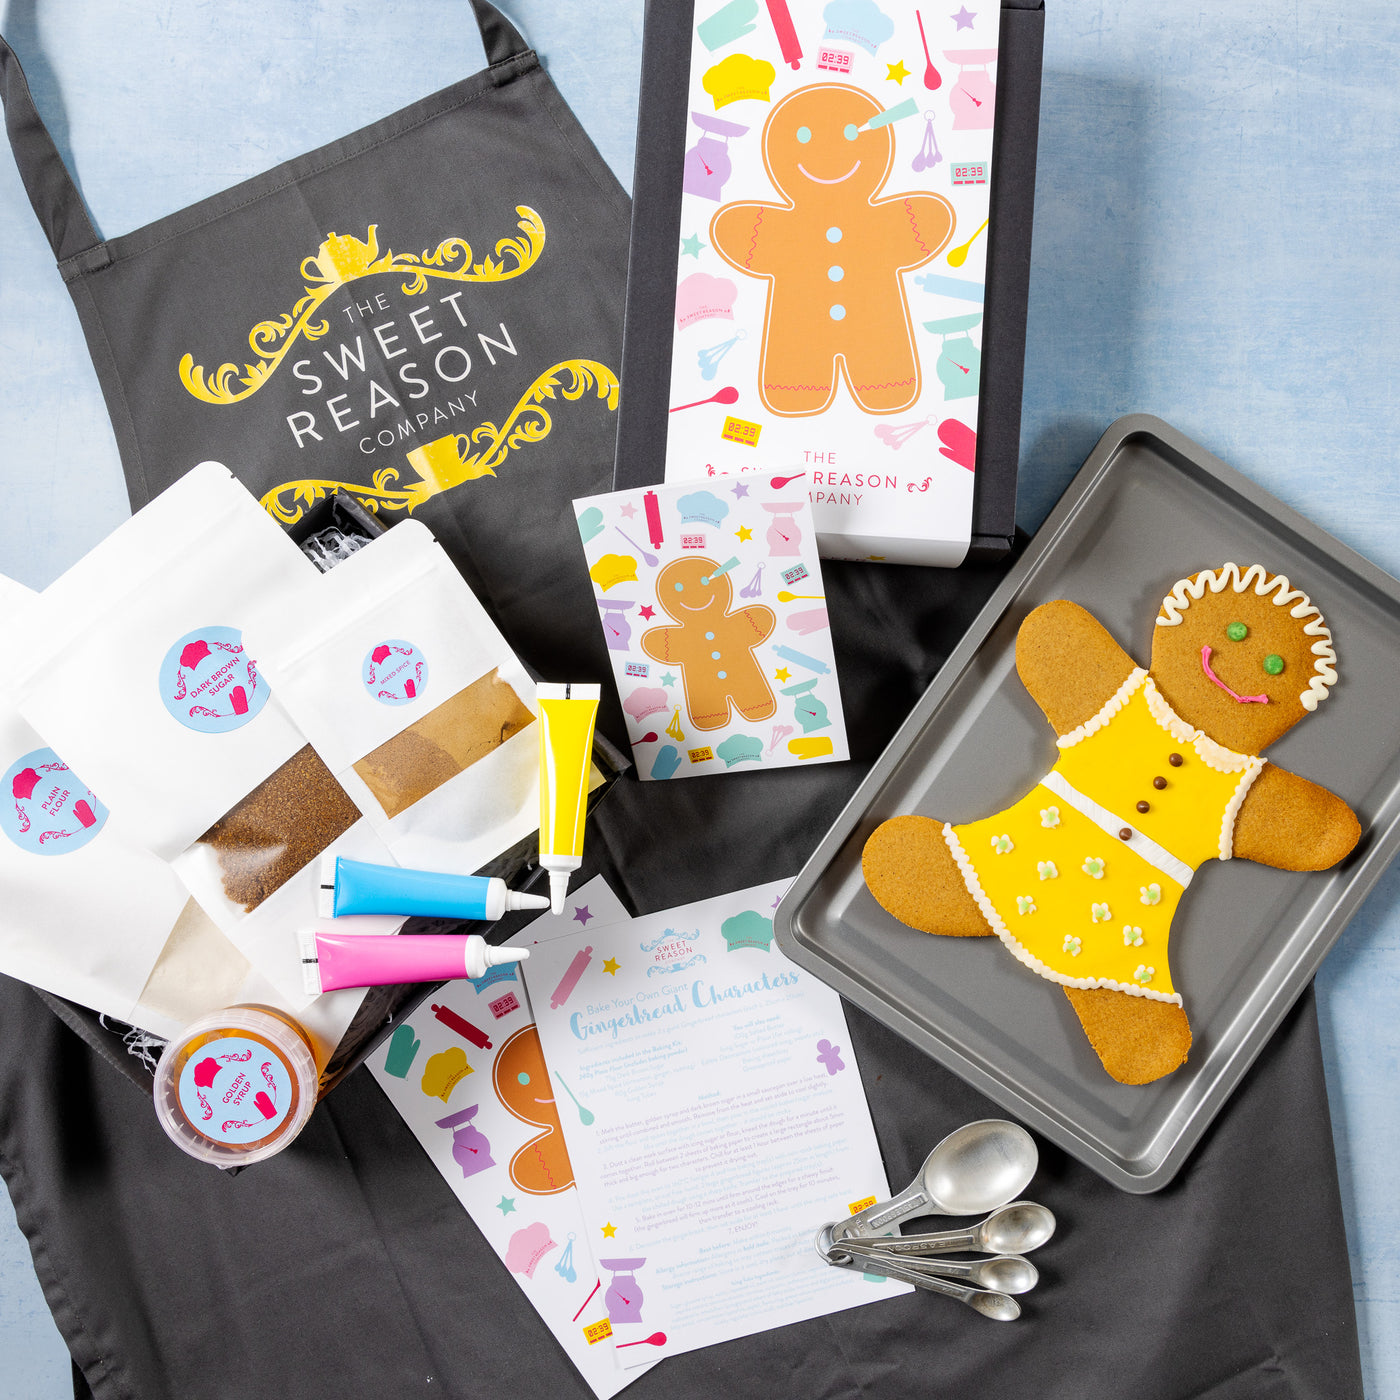 Bake Your Own Gingerbread Character Kit